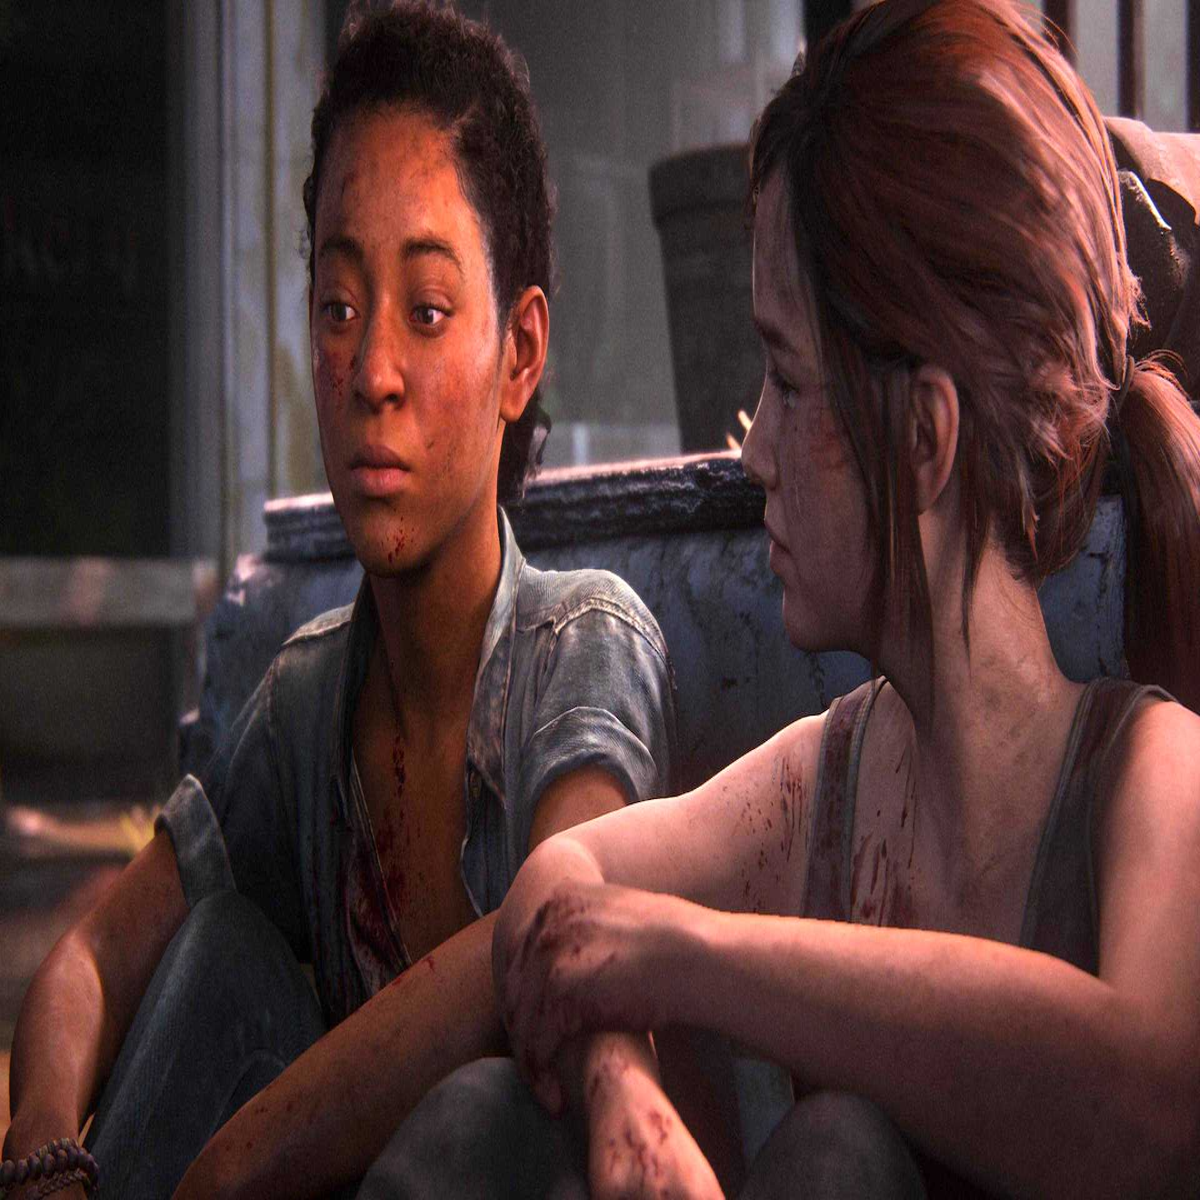 The Last of Us - Left Behind DLC Trophy Guide •